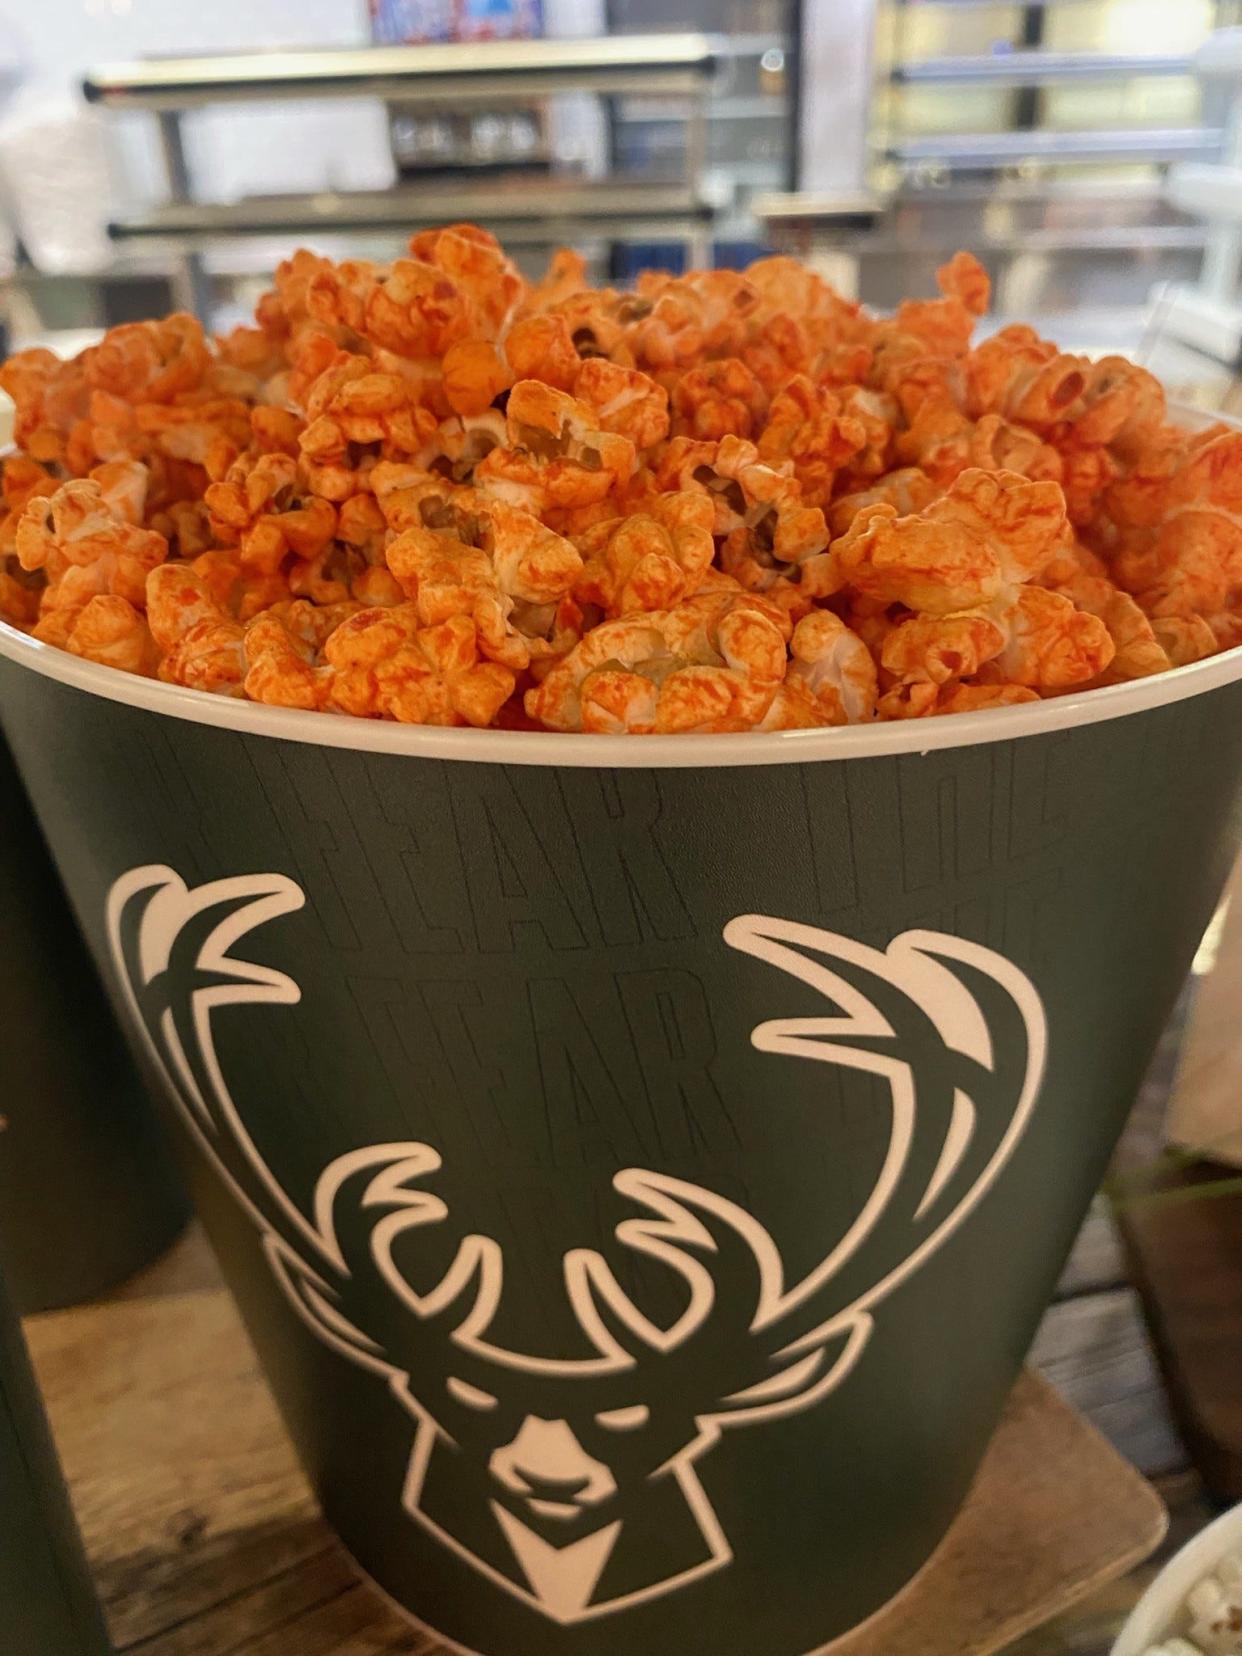 A new Milwaukee Bucks postseason means new food and drink additions around Fiserv Forum. This is Flamin' Hot Cheeto popcorn.